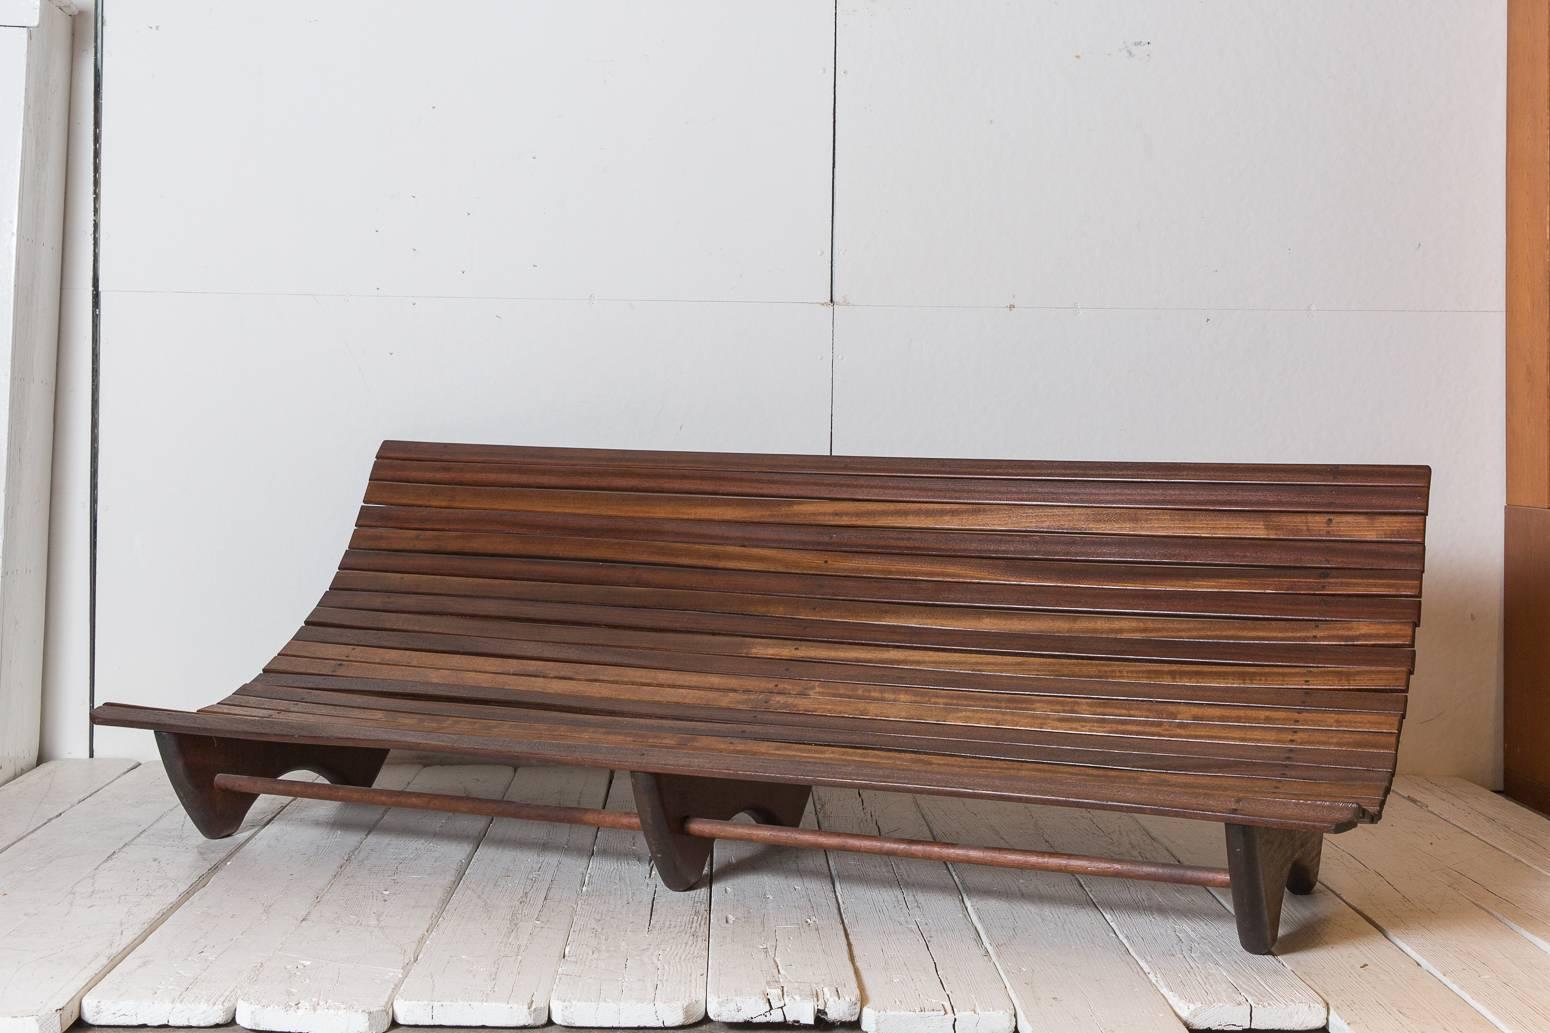 Wood stained Brazilian curved slatted bench with three legs.